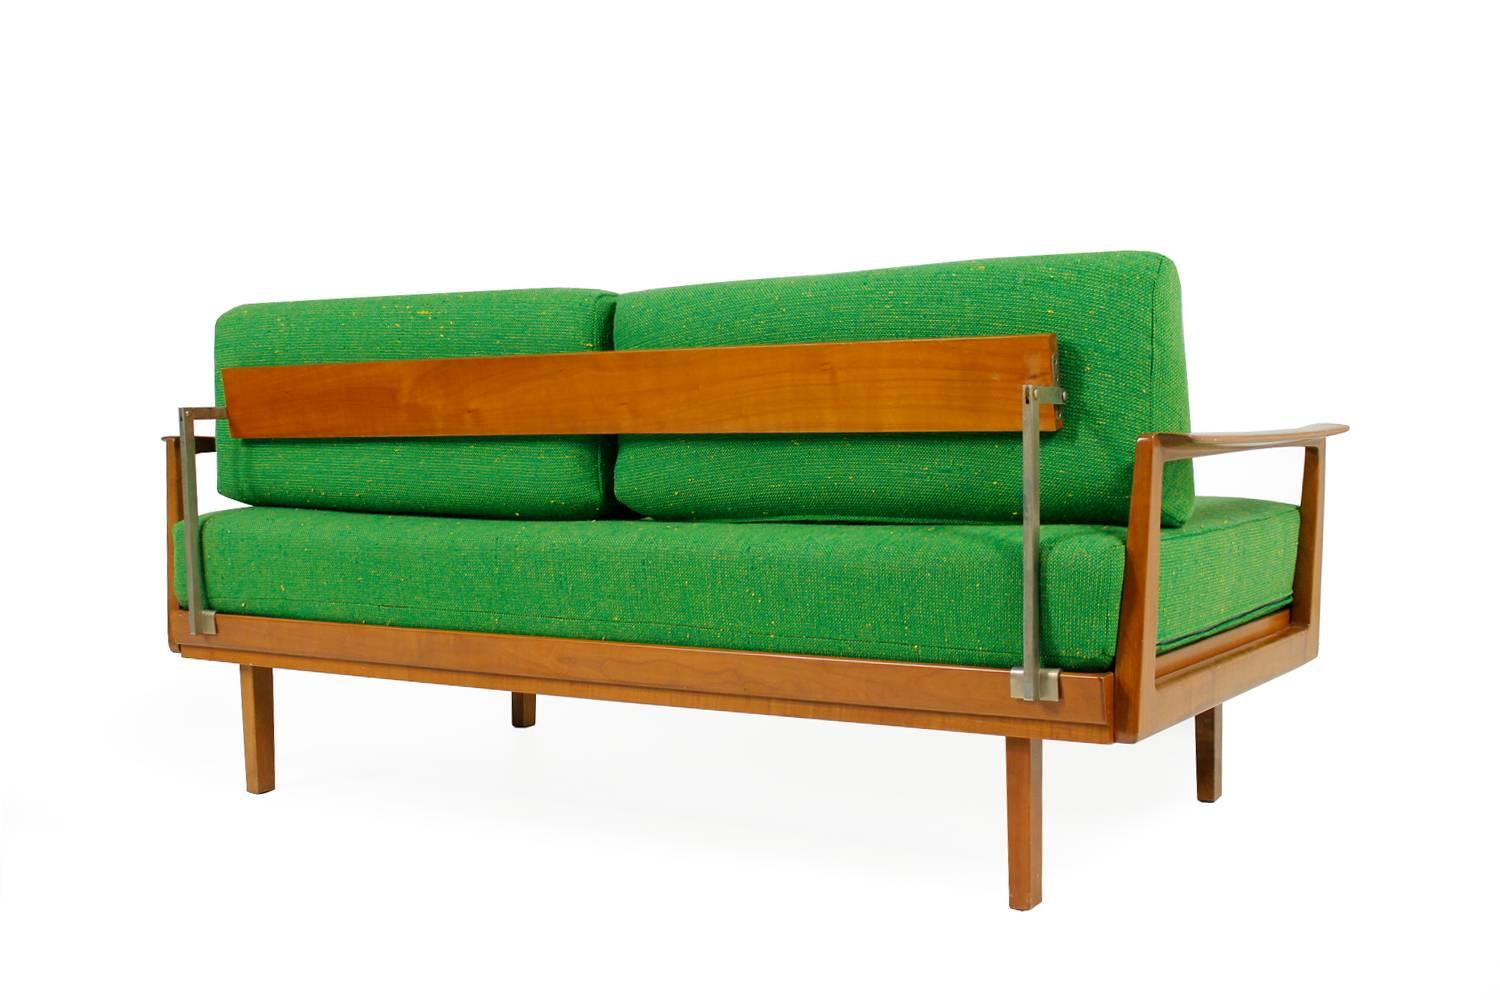 Nice daybed/sofa by Wilhelm Knoll, Germany, 1950s. Extendable version, mod. Knoll Antimott. Multi adjustable headrest, adjustable back rest. Freestanding. Green woven fabric, reupholstered a few years ago, very good condition.
Dimensions: circa 165